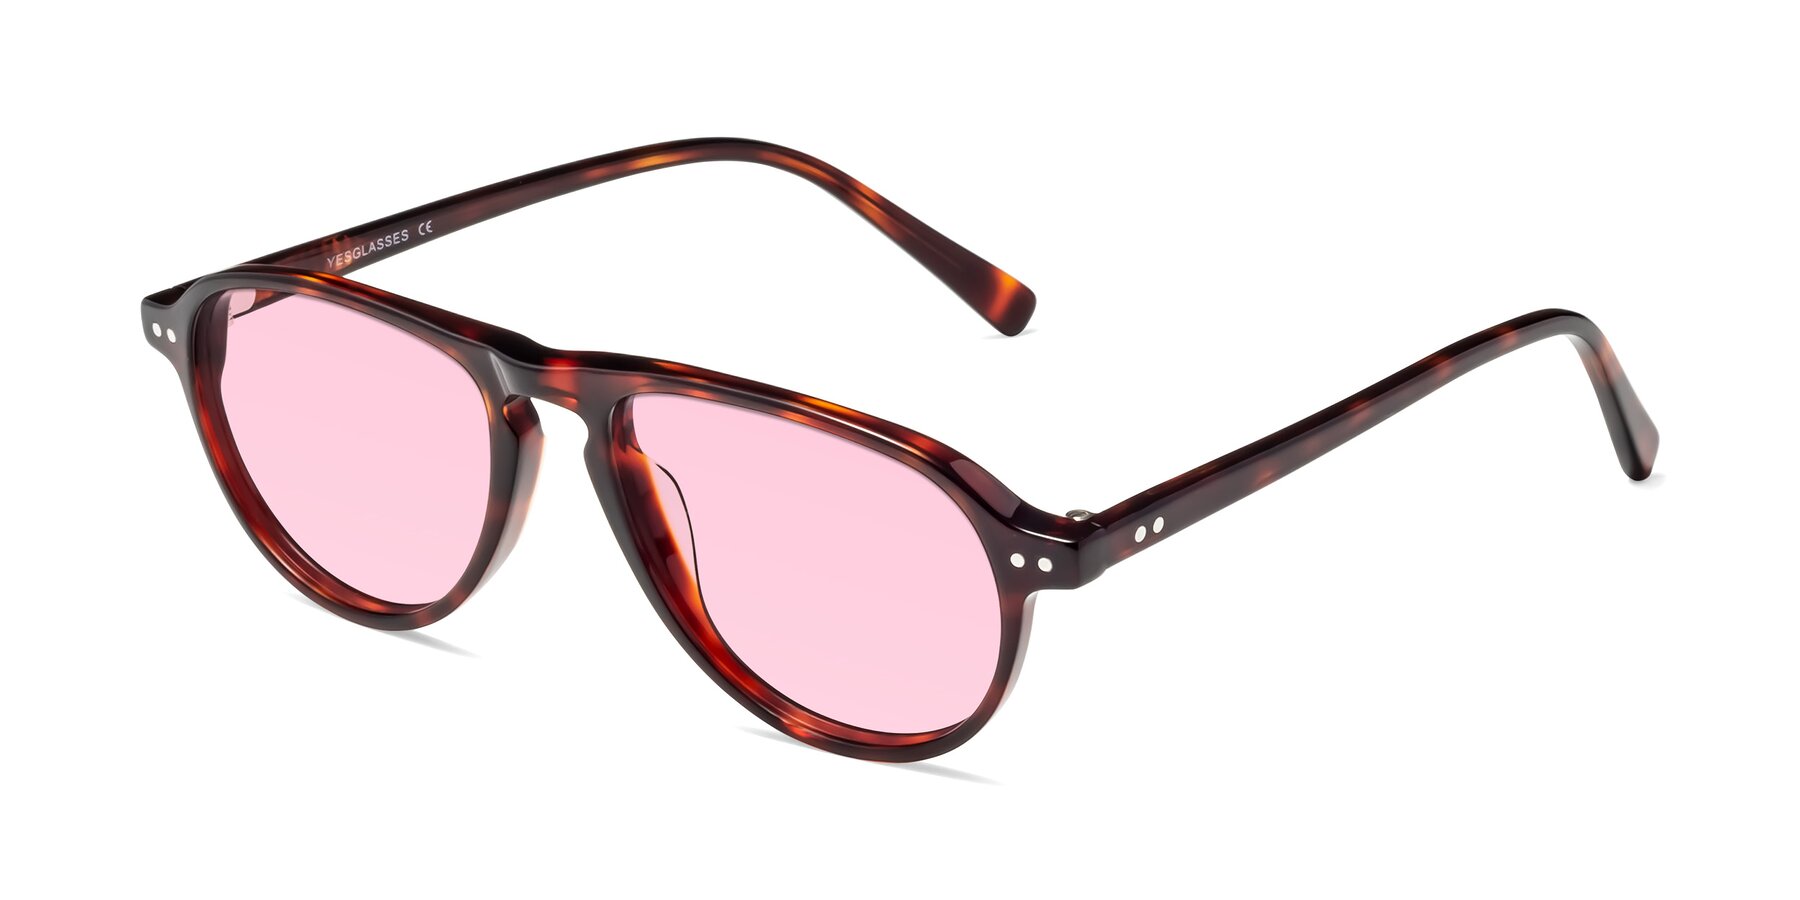 Angle of 17544 in Burgundy Tortoise with Light Pink Tinted Lenses